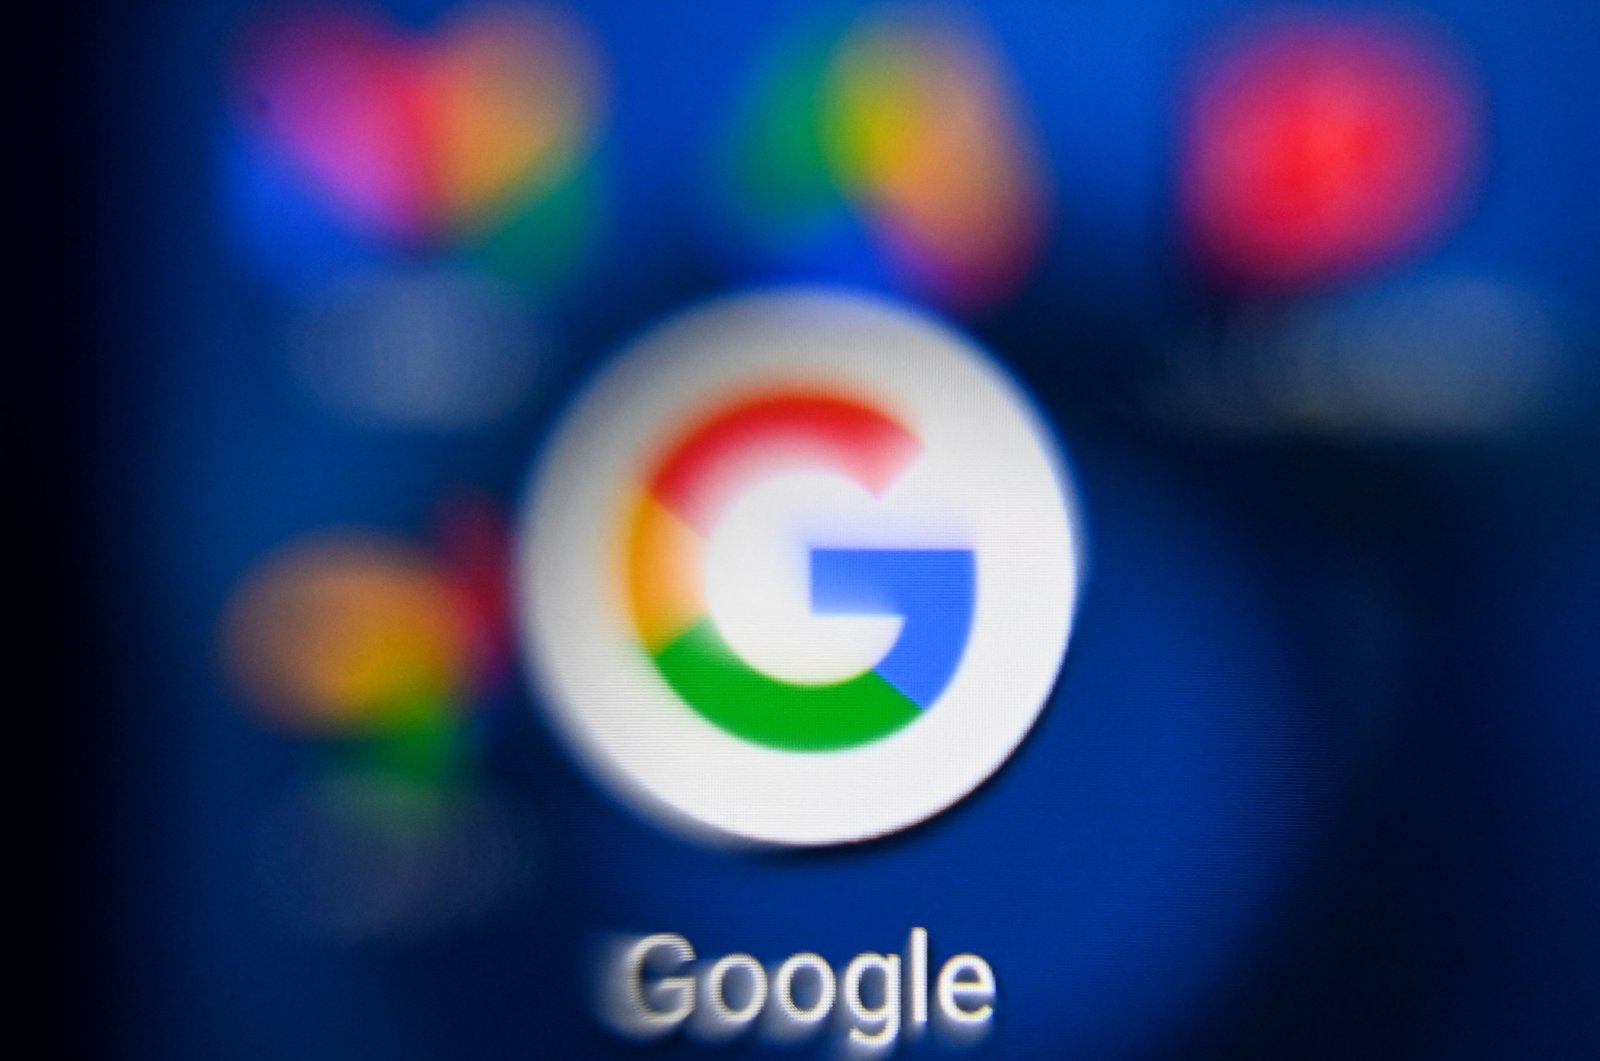 The U.S. multinational technology and internet-related services company Google&#039;s logo is seen on a tablet screen, Oct.18, 2021. (AFP File Photo)